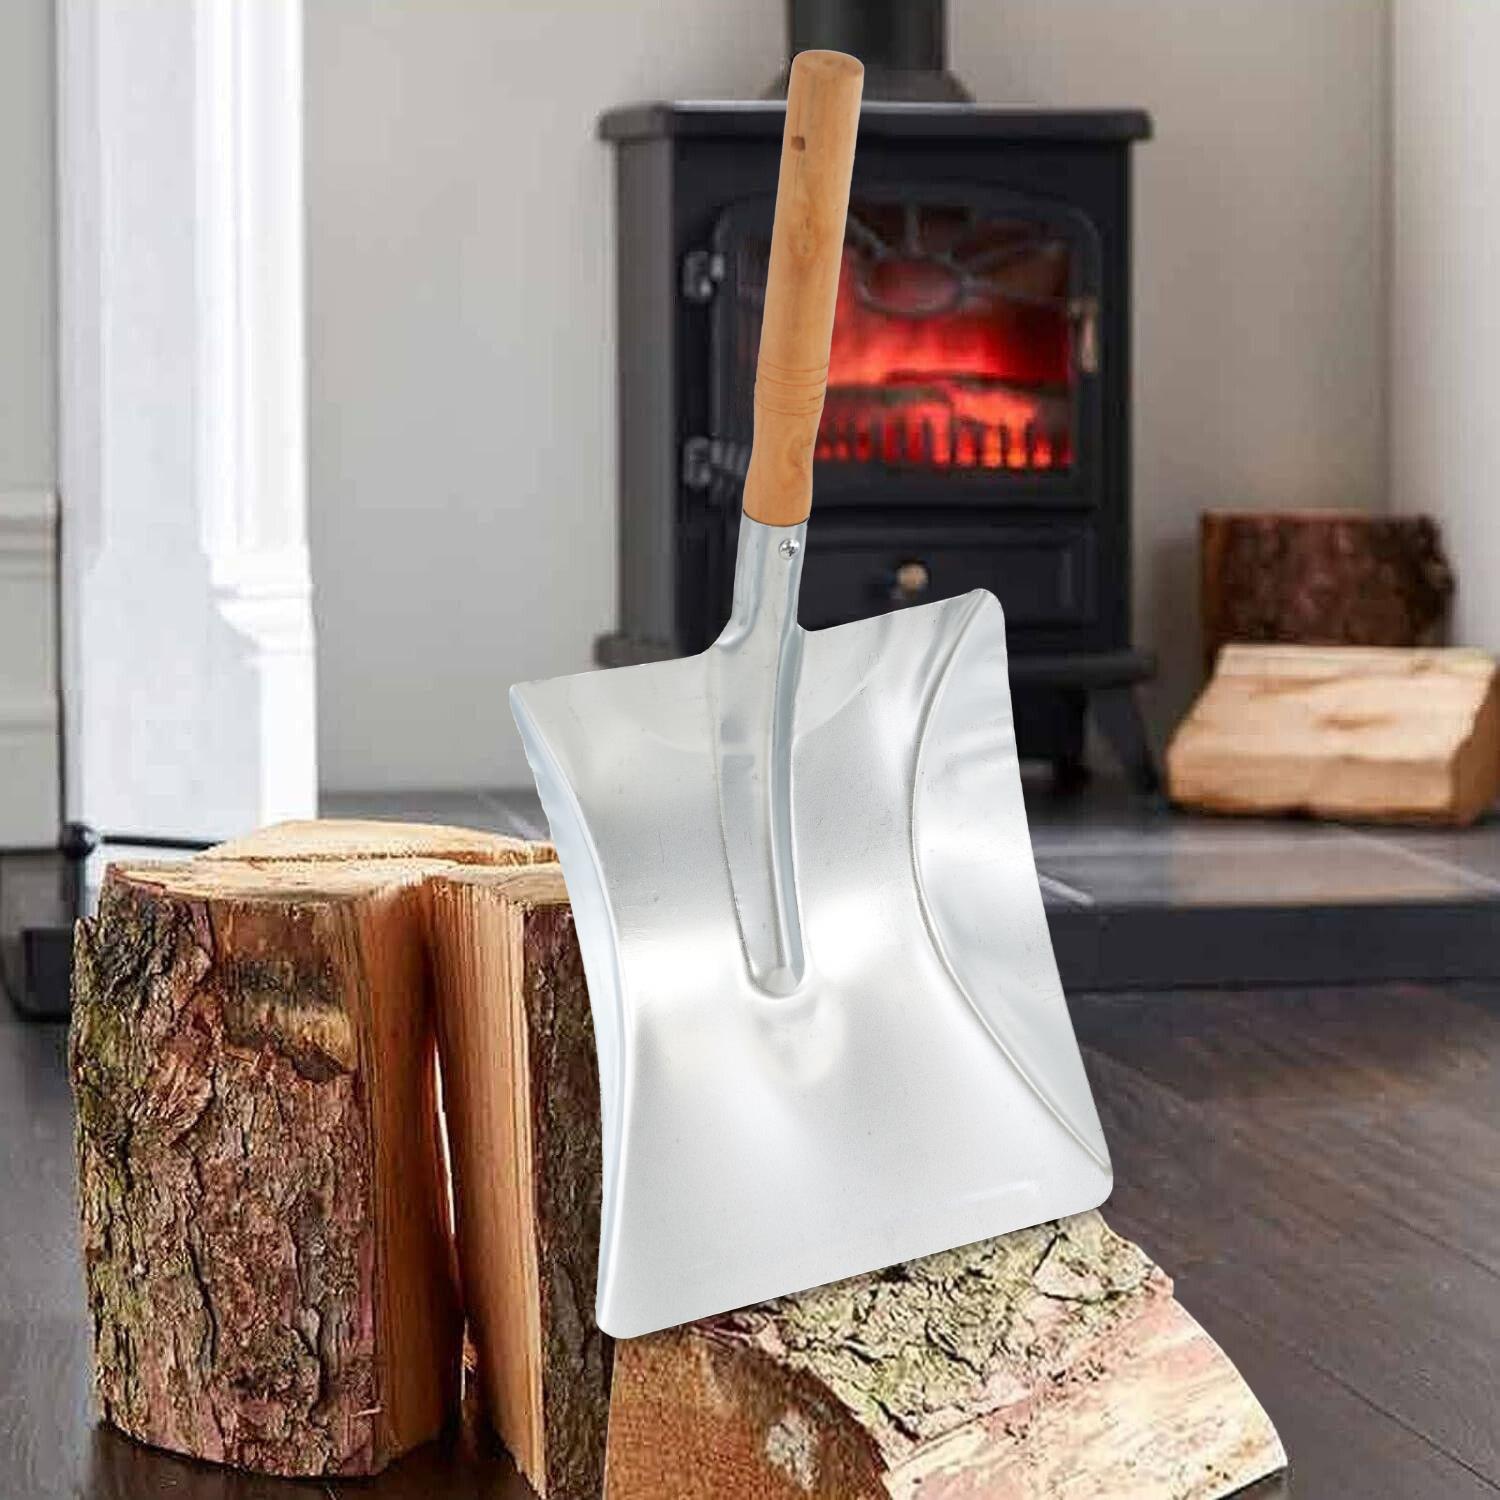 Compact Coal Shovel, Metal Head & Wooden Handle by GEEZY - The Magic Toy Shop